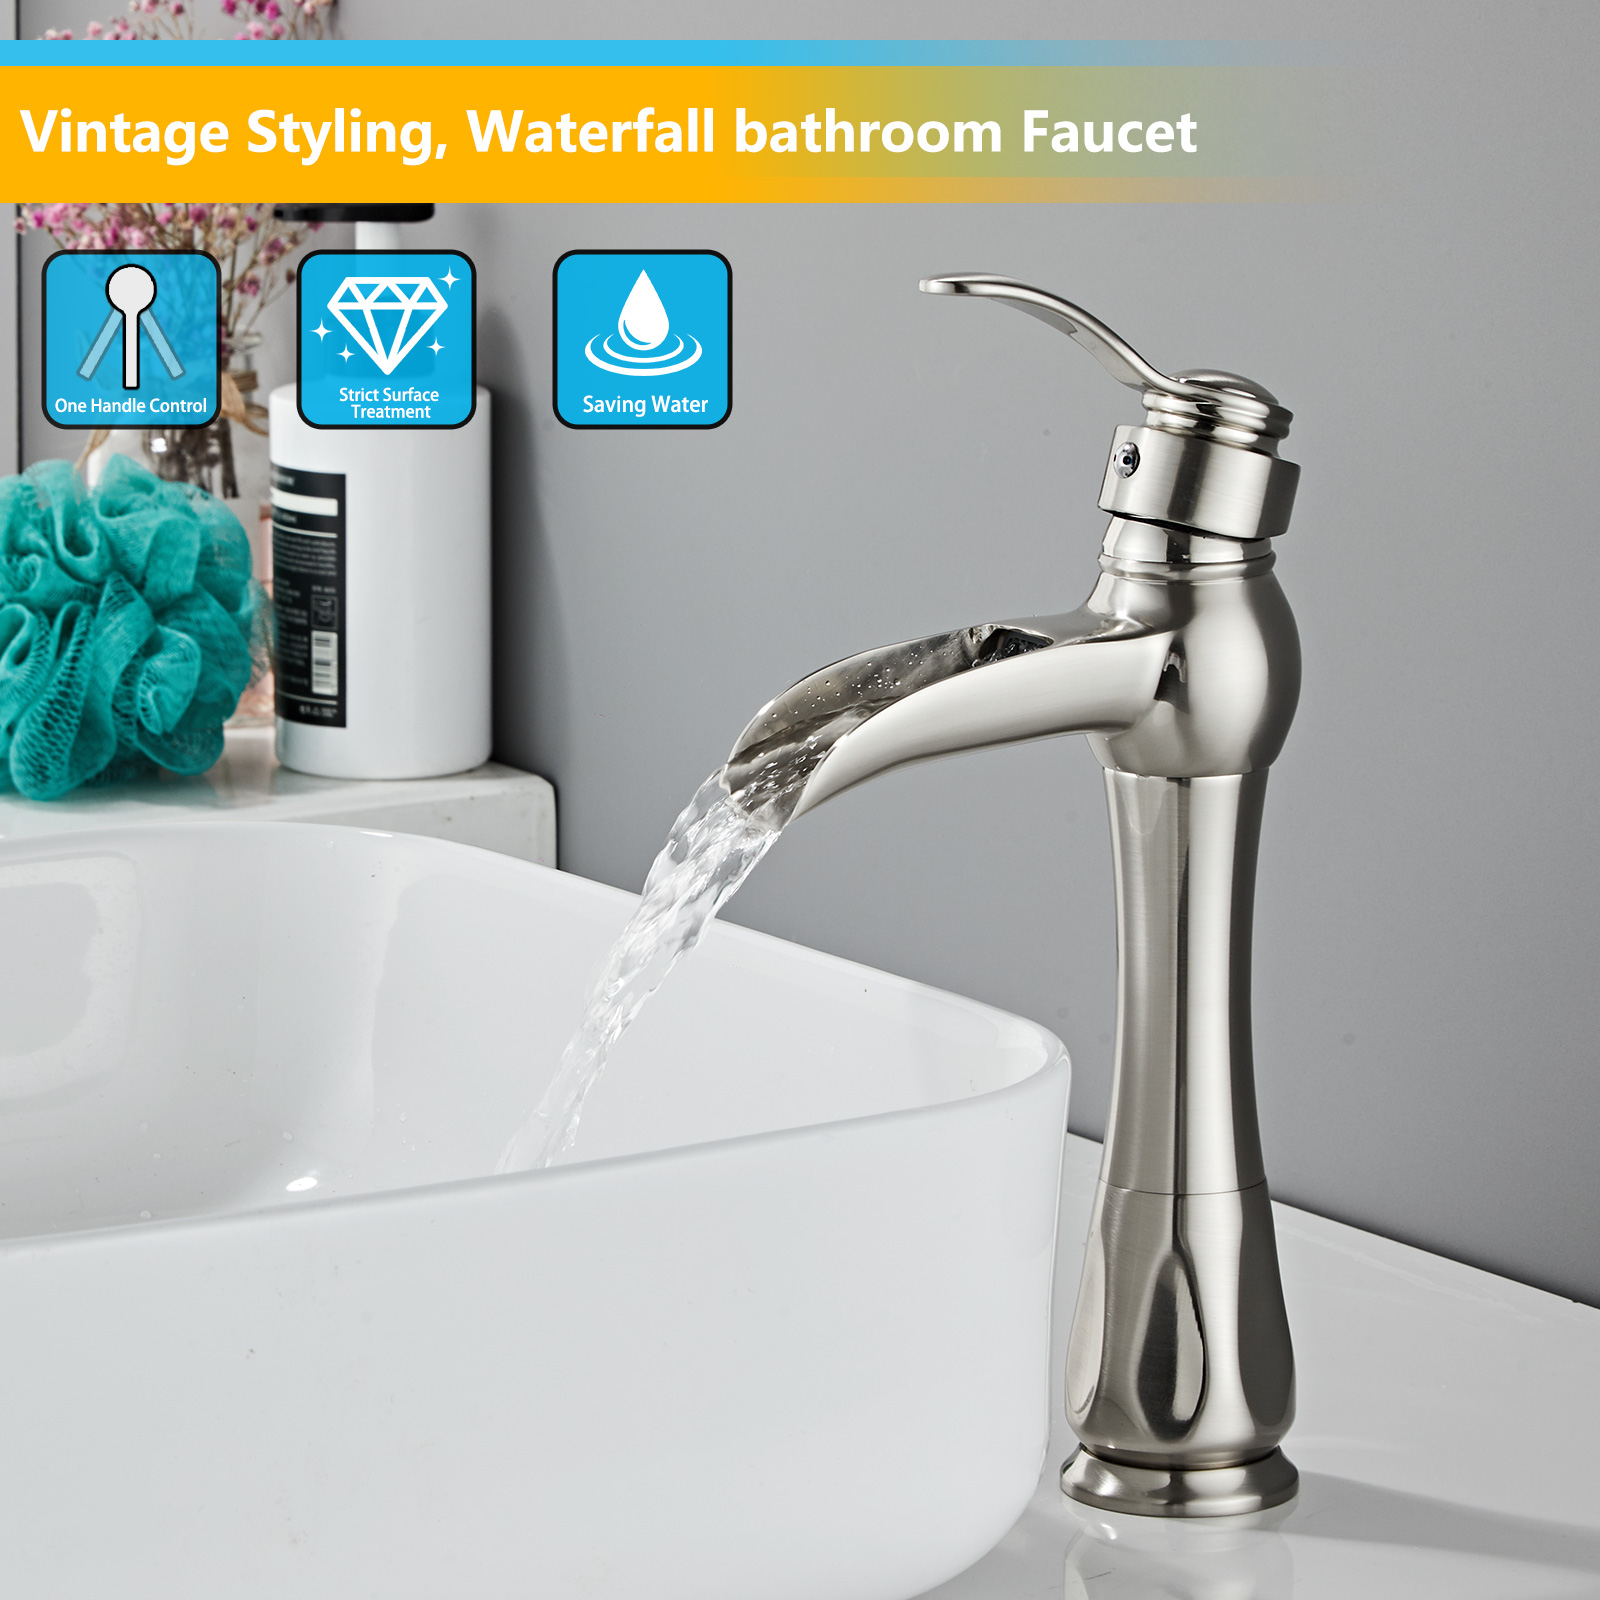 Wovier Waterfall Vessel Faucet with Supply Hose,Single Handle Single Hole Bathroom Faucet W8276-27